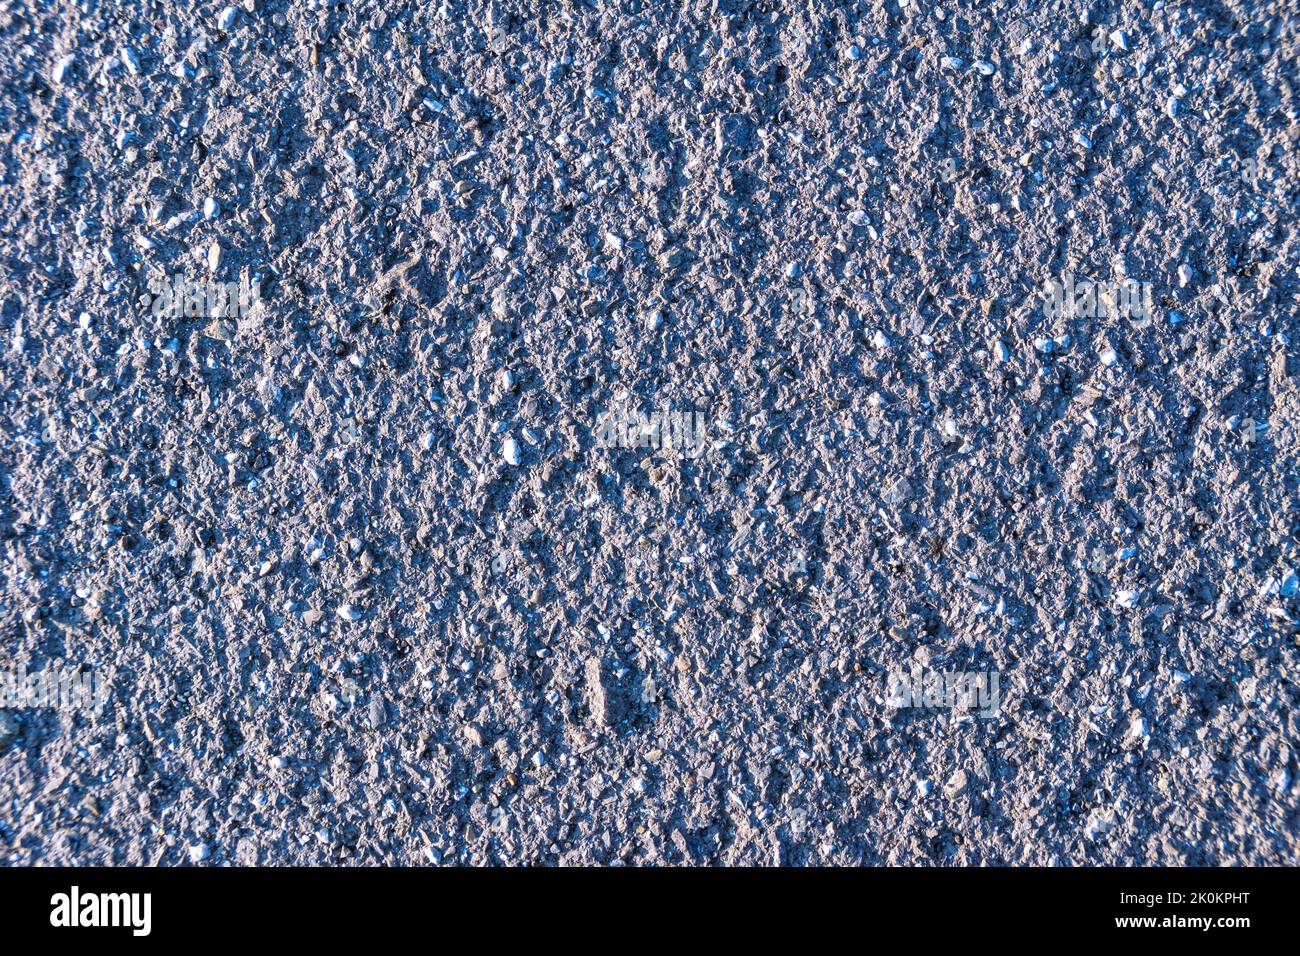 texture of an old pavement with asphalt paved worn by millions of feet, selective focus Stock Photo